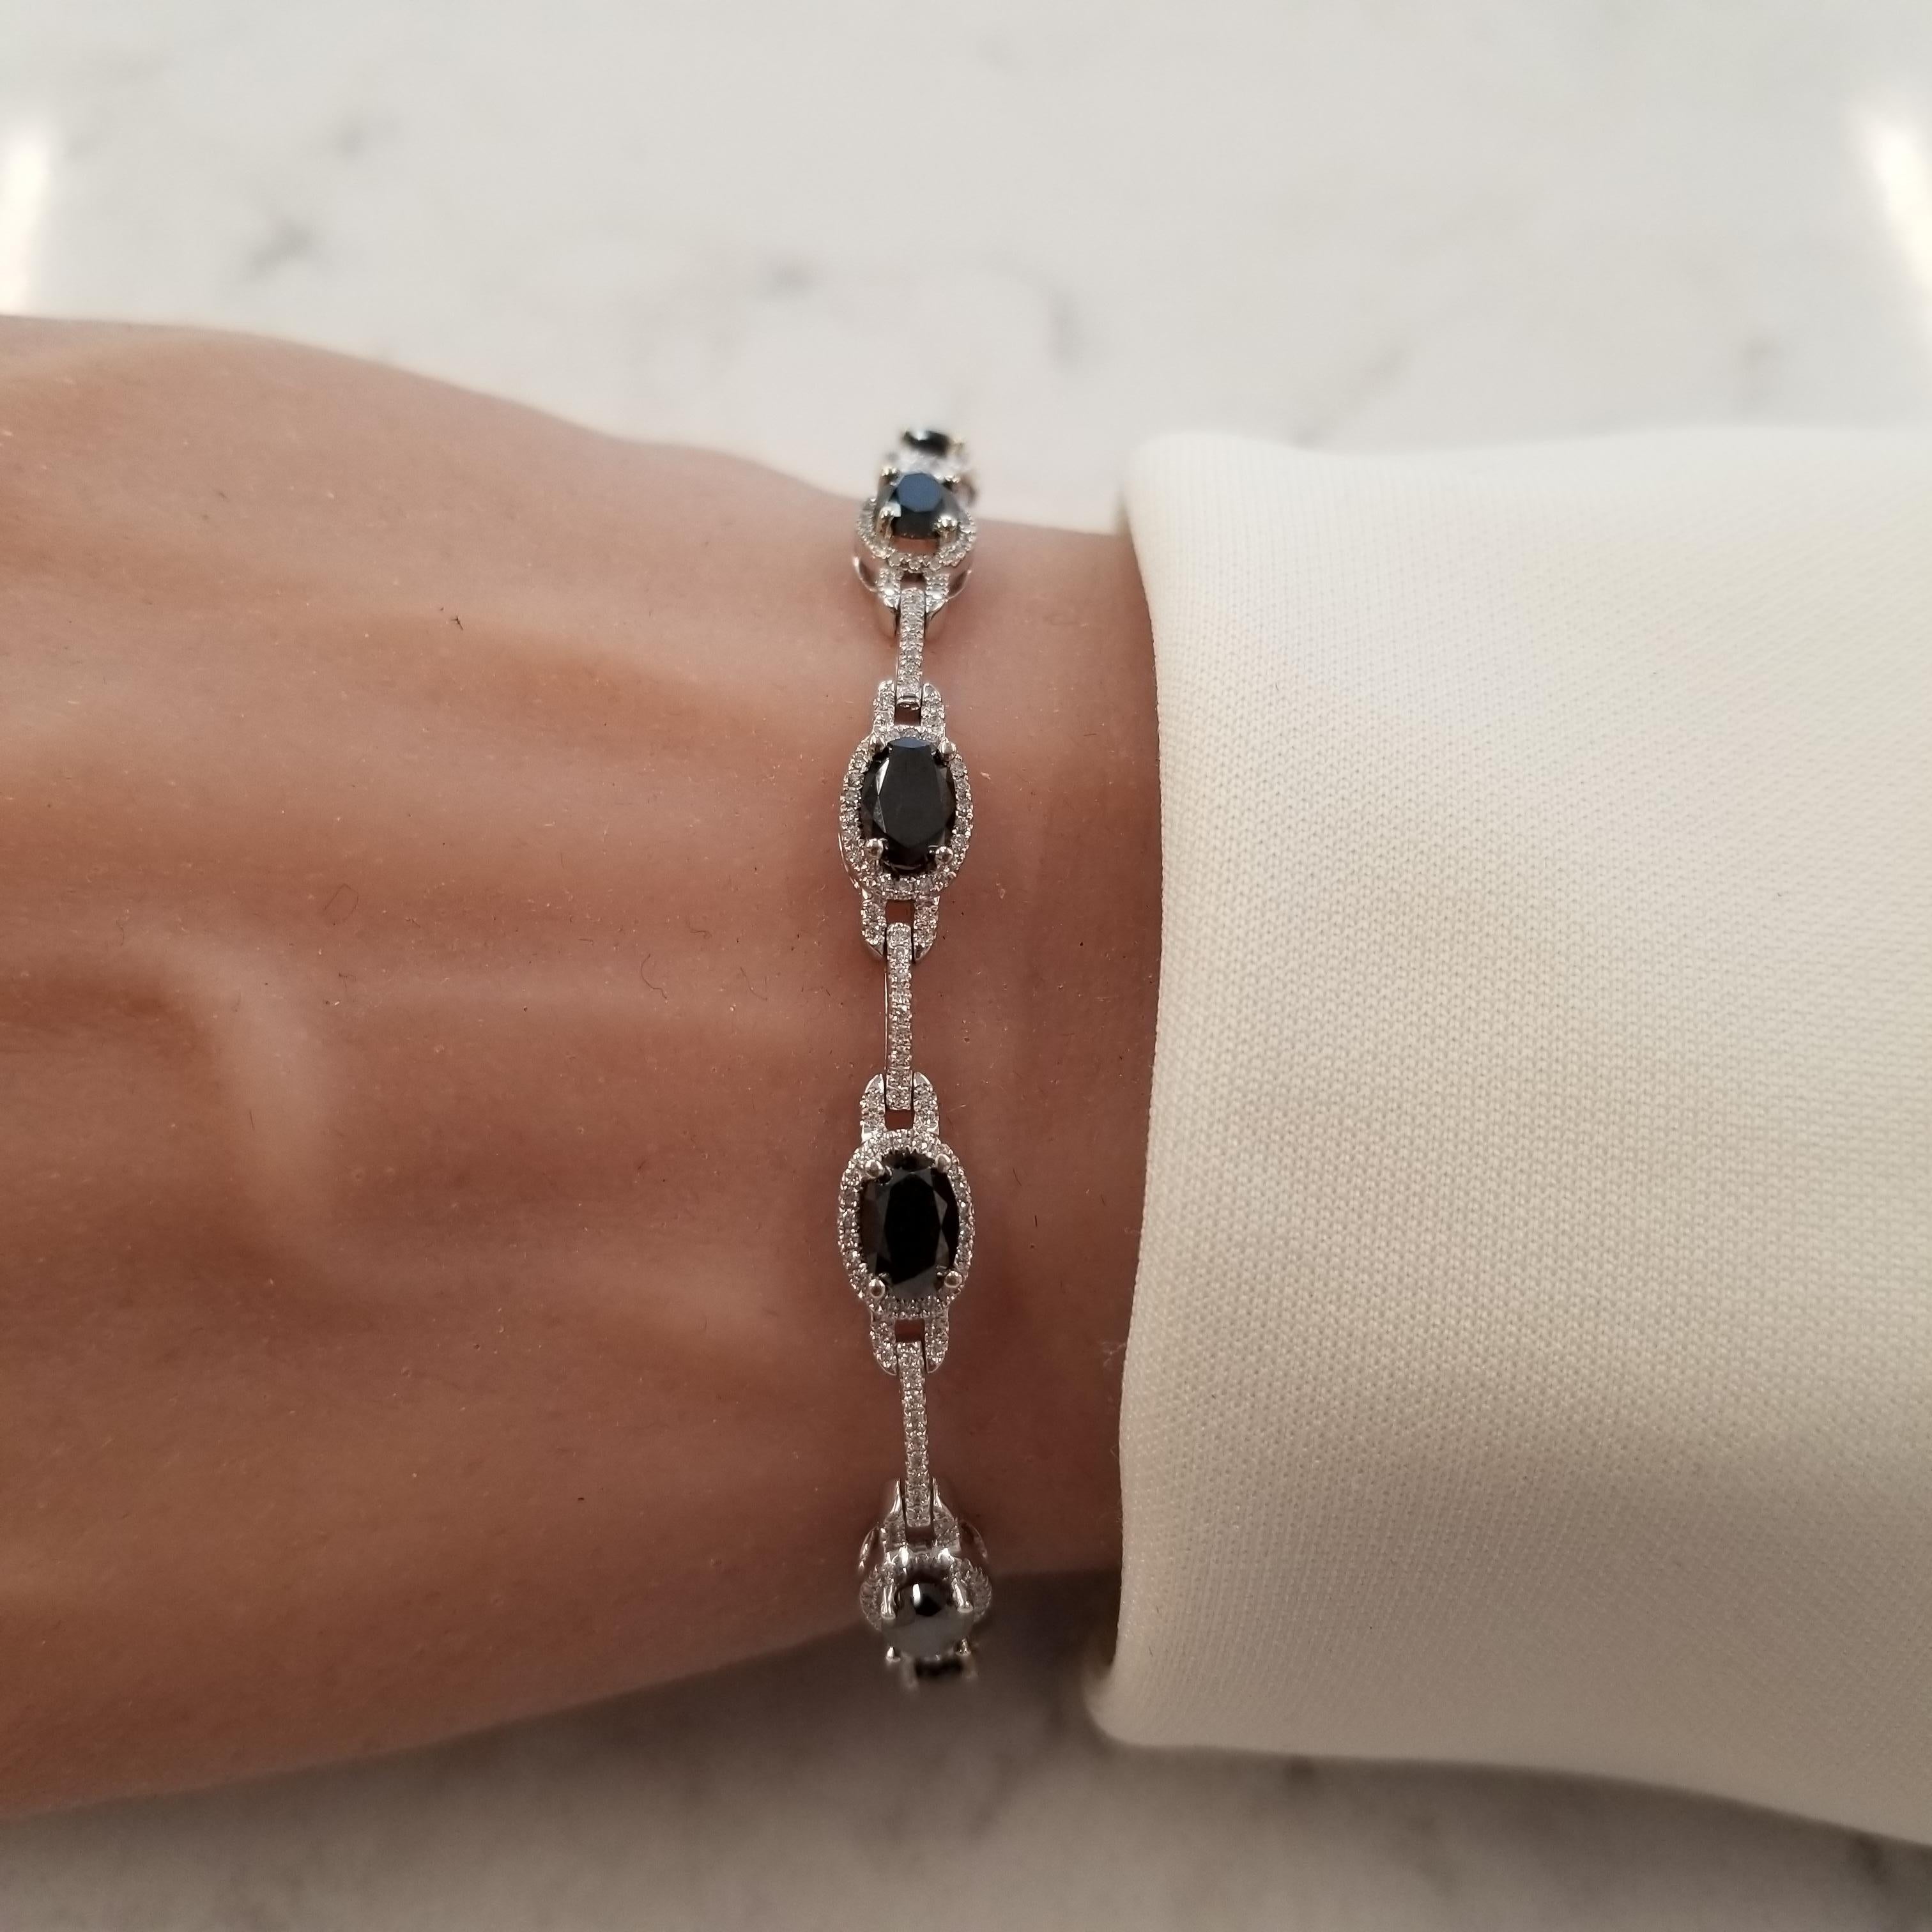 The color concept on this stunning bracelet resembles the keys on a classic piano. It boasts 10 oval cut, prong set, black diamonds totaling 4.84 carats. These rich black diamonds are complemented by sparkling round brilliant cut diamonds, that are